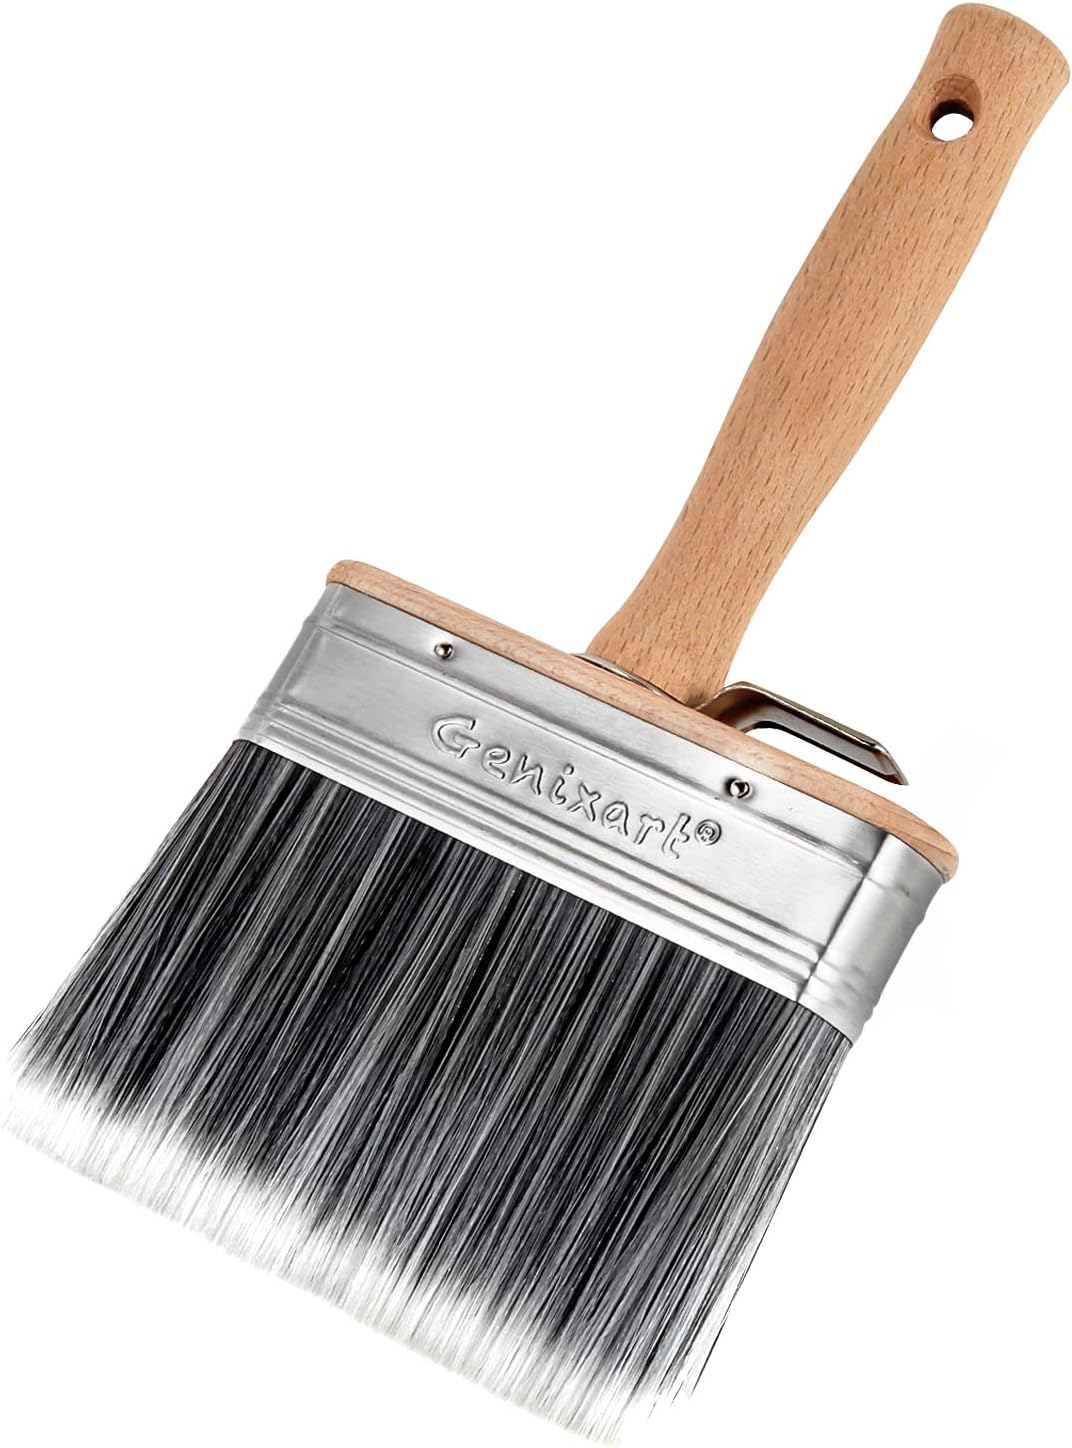 Deck Stain & Sealer Block Paint Brushes, 5 inch Wide [...]